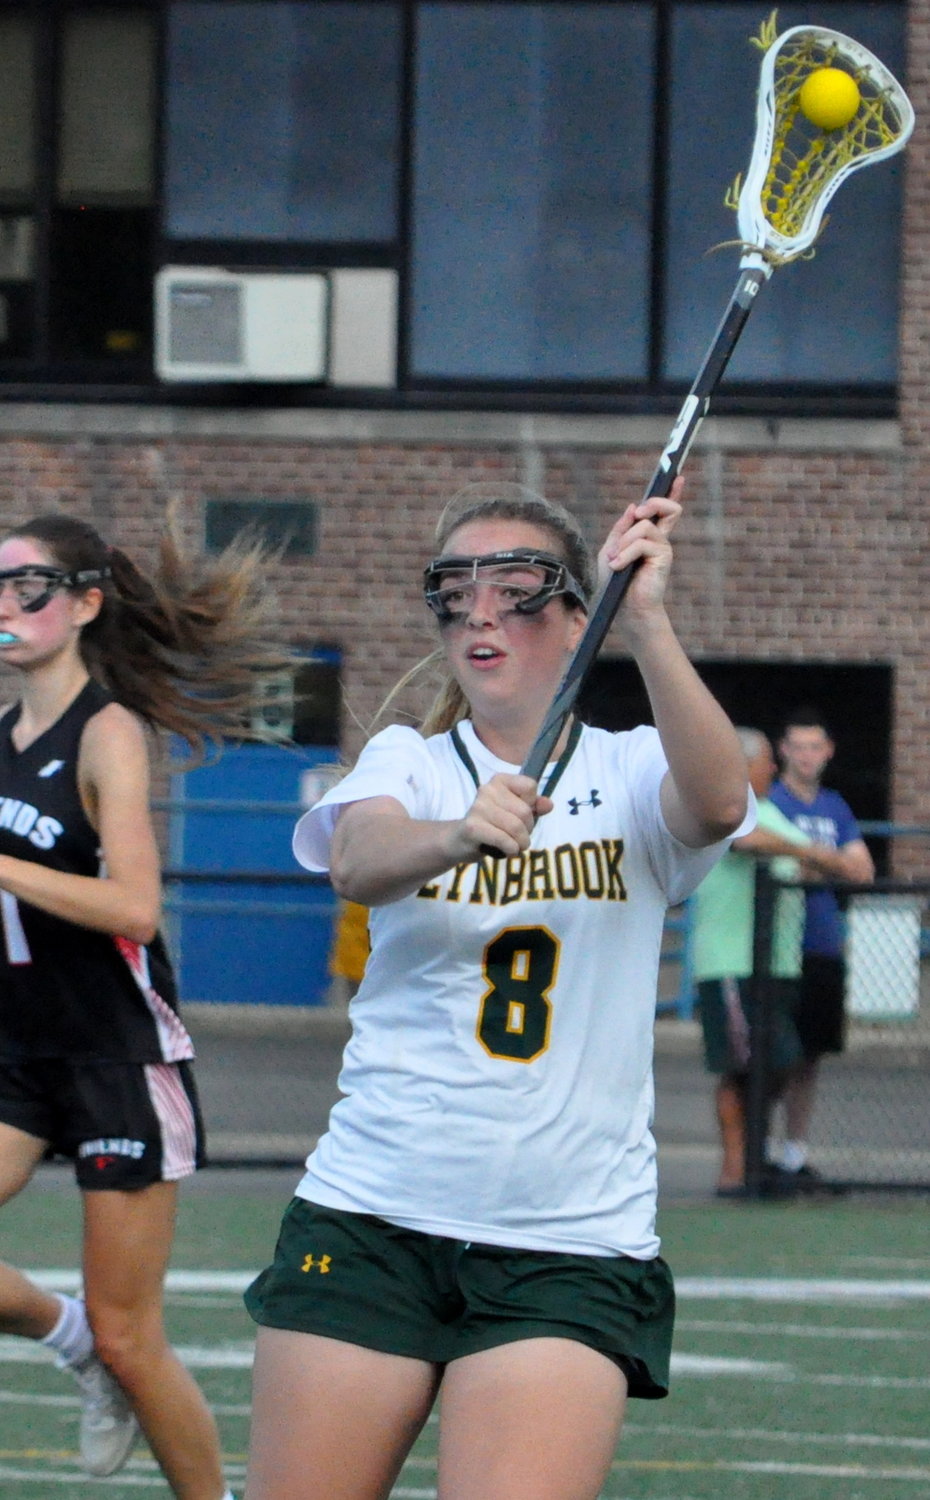 Junior Caityblu Cavassa had three assists and dominated draws in Lynbrook's 15-9 playoff victory over Friends Academy.